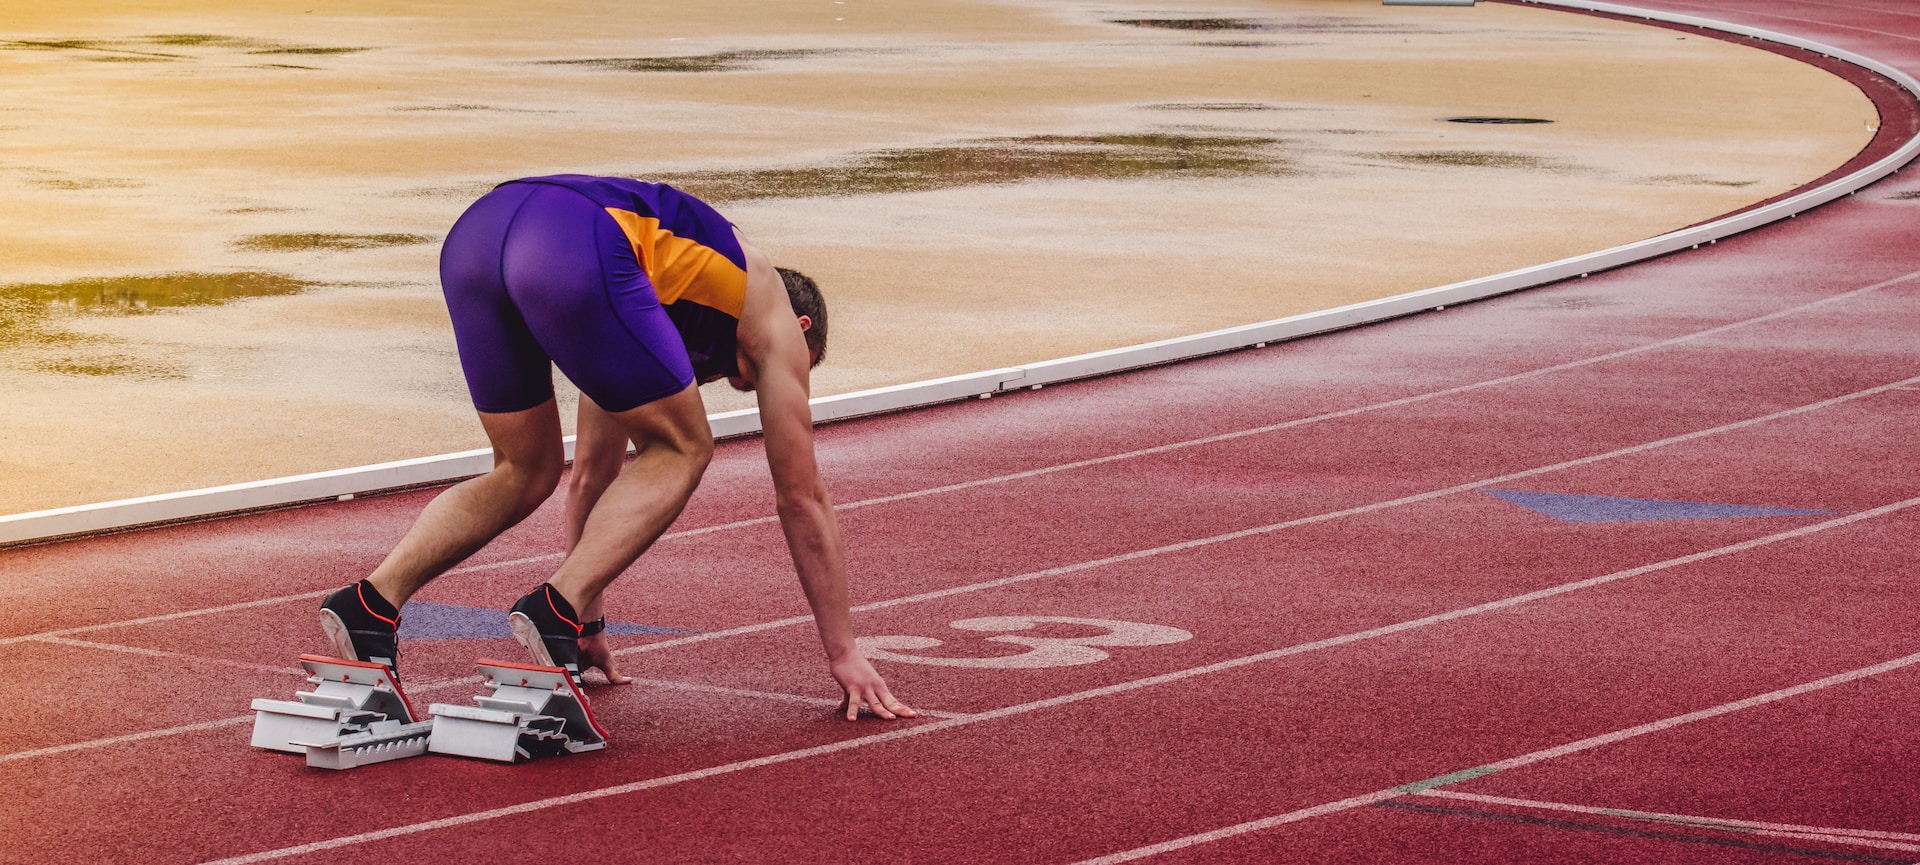 the image shows a male runner standing at the low start